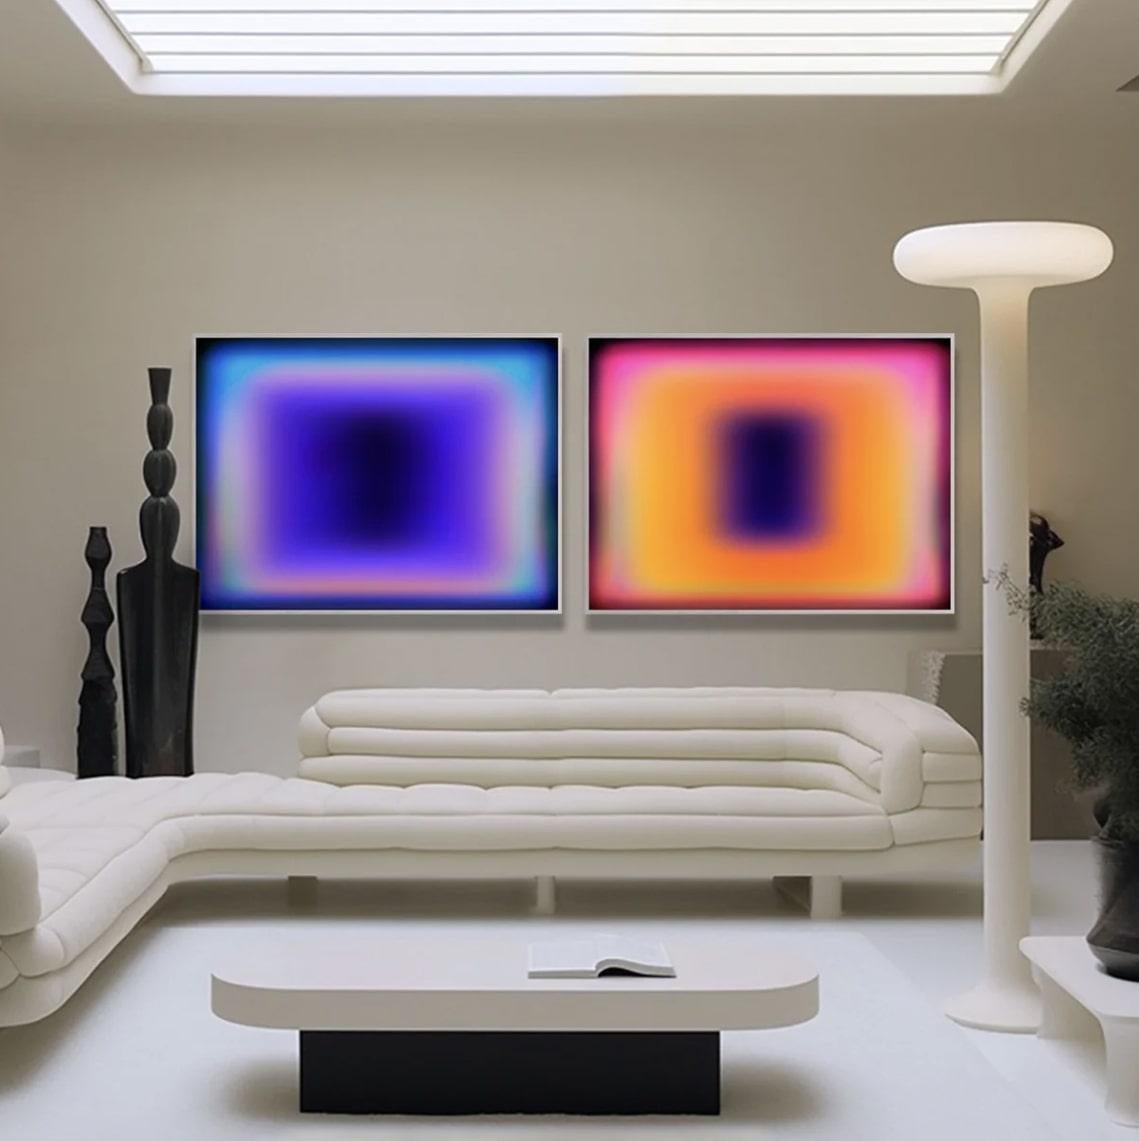 Known for his large scale, hyper-color Spectral Paintings and immersive projection installations, Thomm explores modern color systems, abstract image construction, and the merge of traditional art with technology, resulting in a hypnotic combination